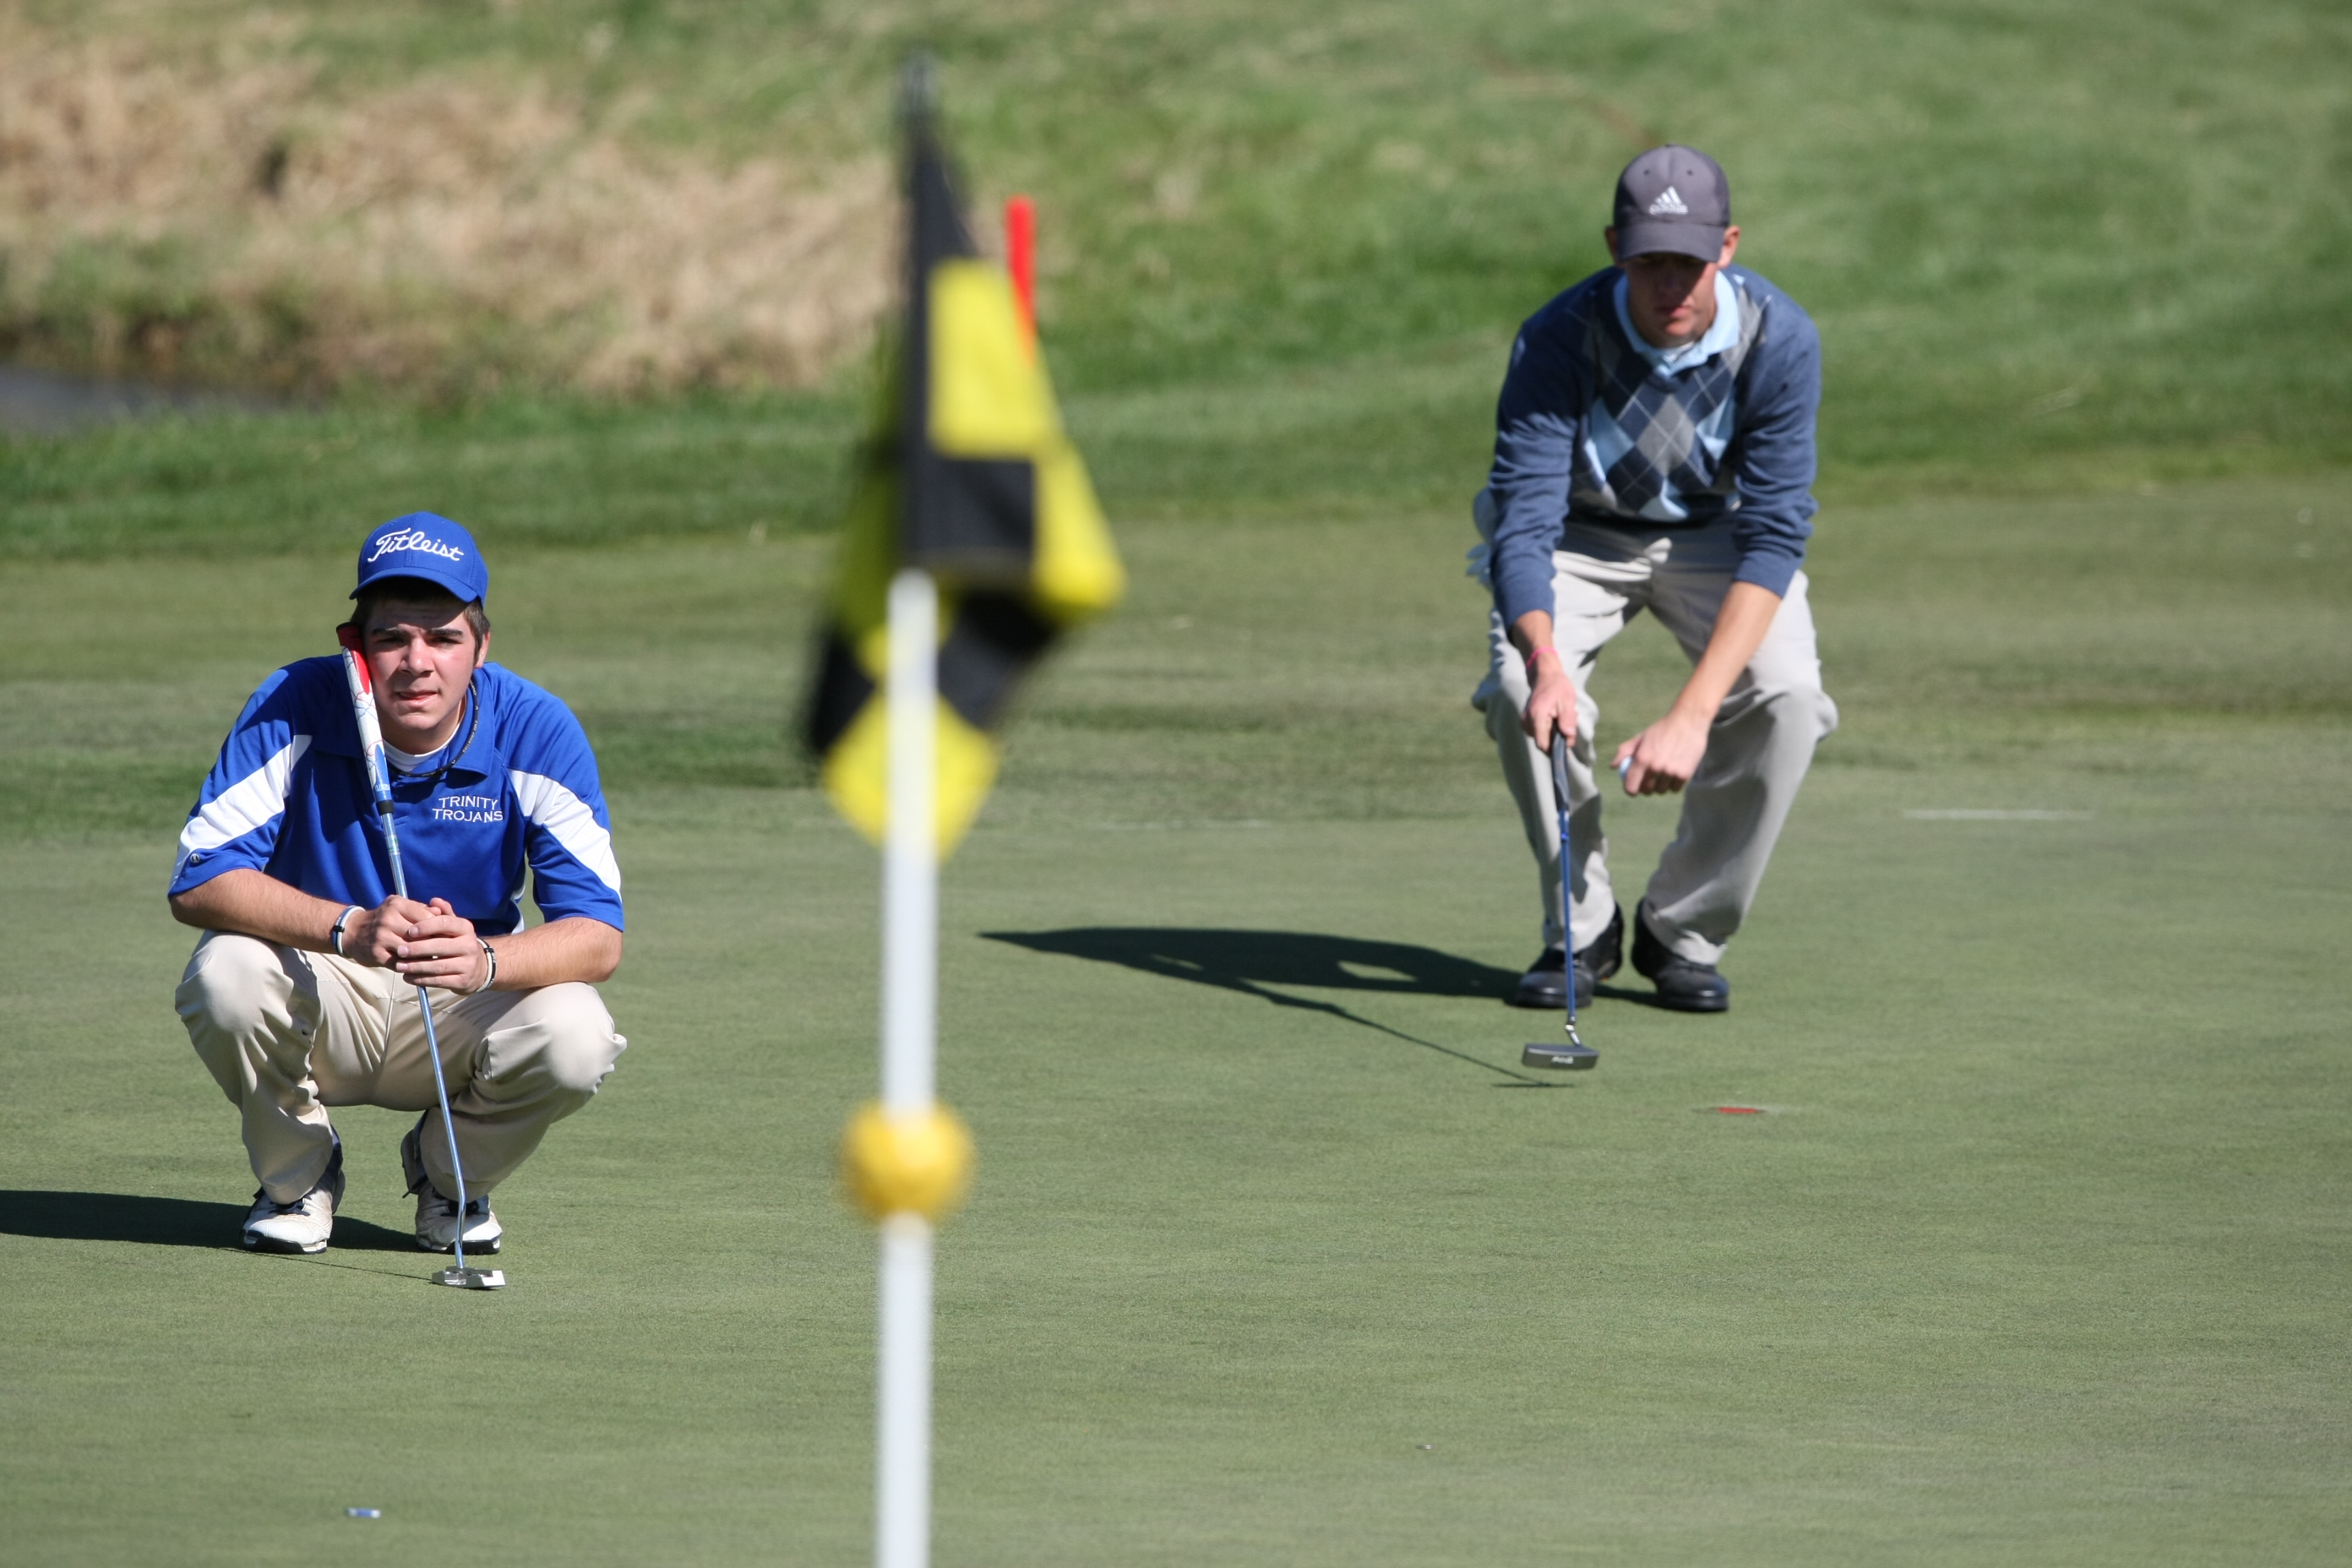 OHSAA Golf State Tournament Photo Gallery